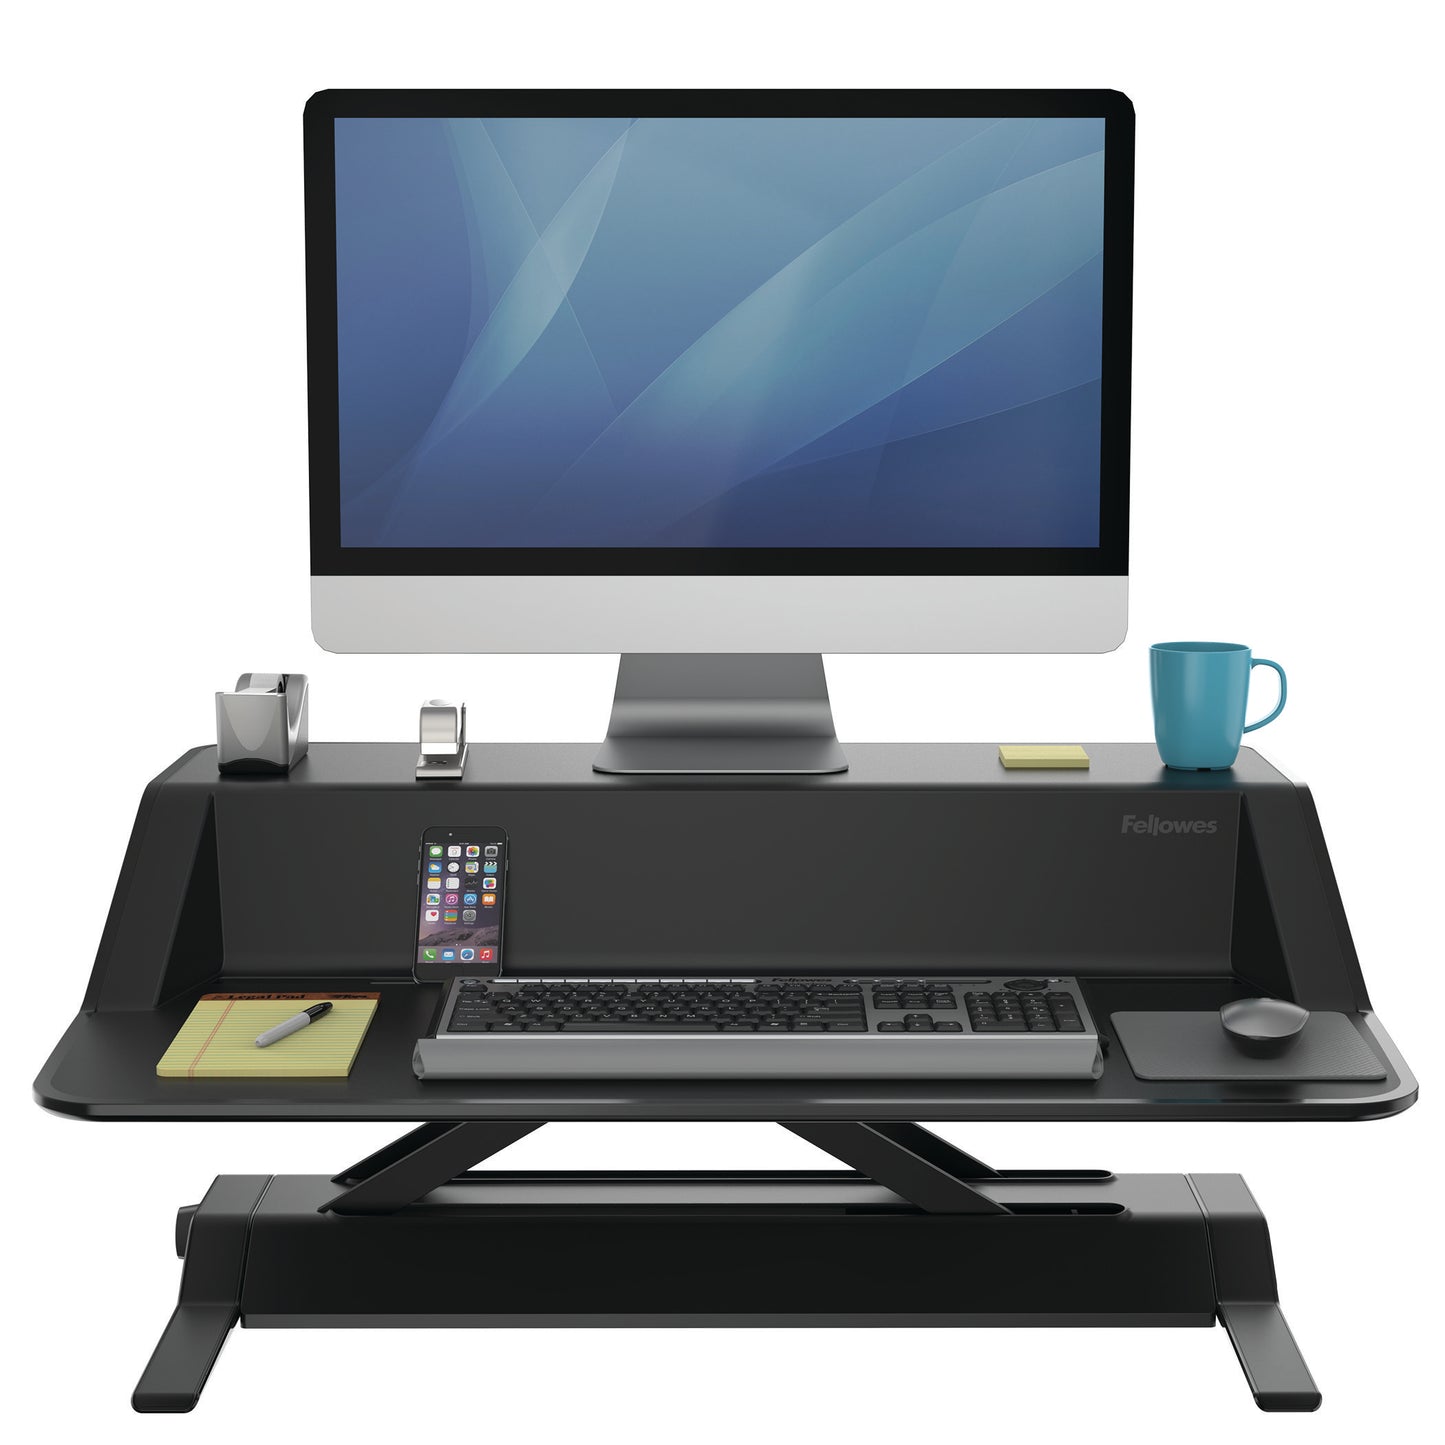 BUY FELLOWES LOTUS Sit Stand Workstation with FREE SHIPPING 7901 black